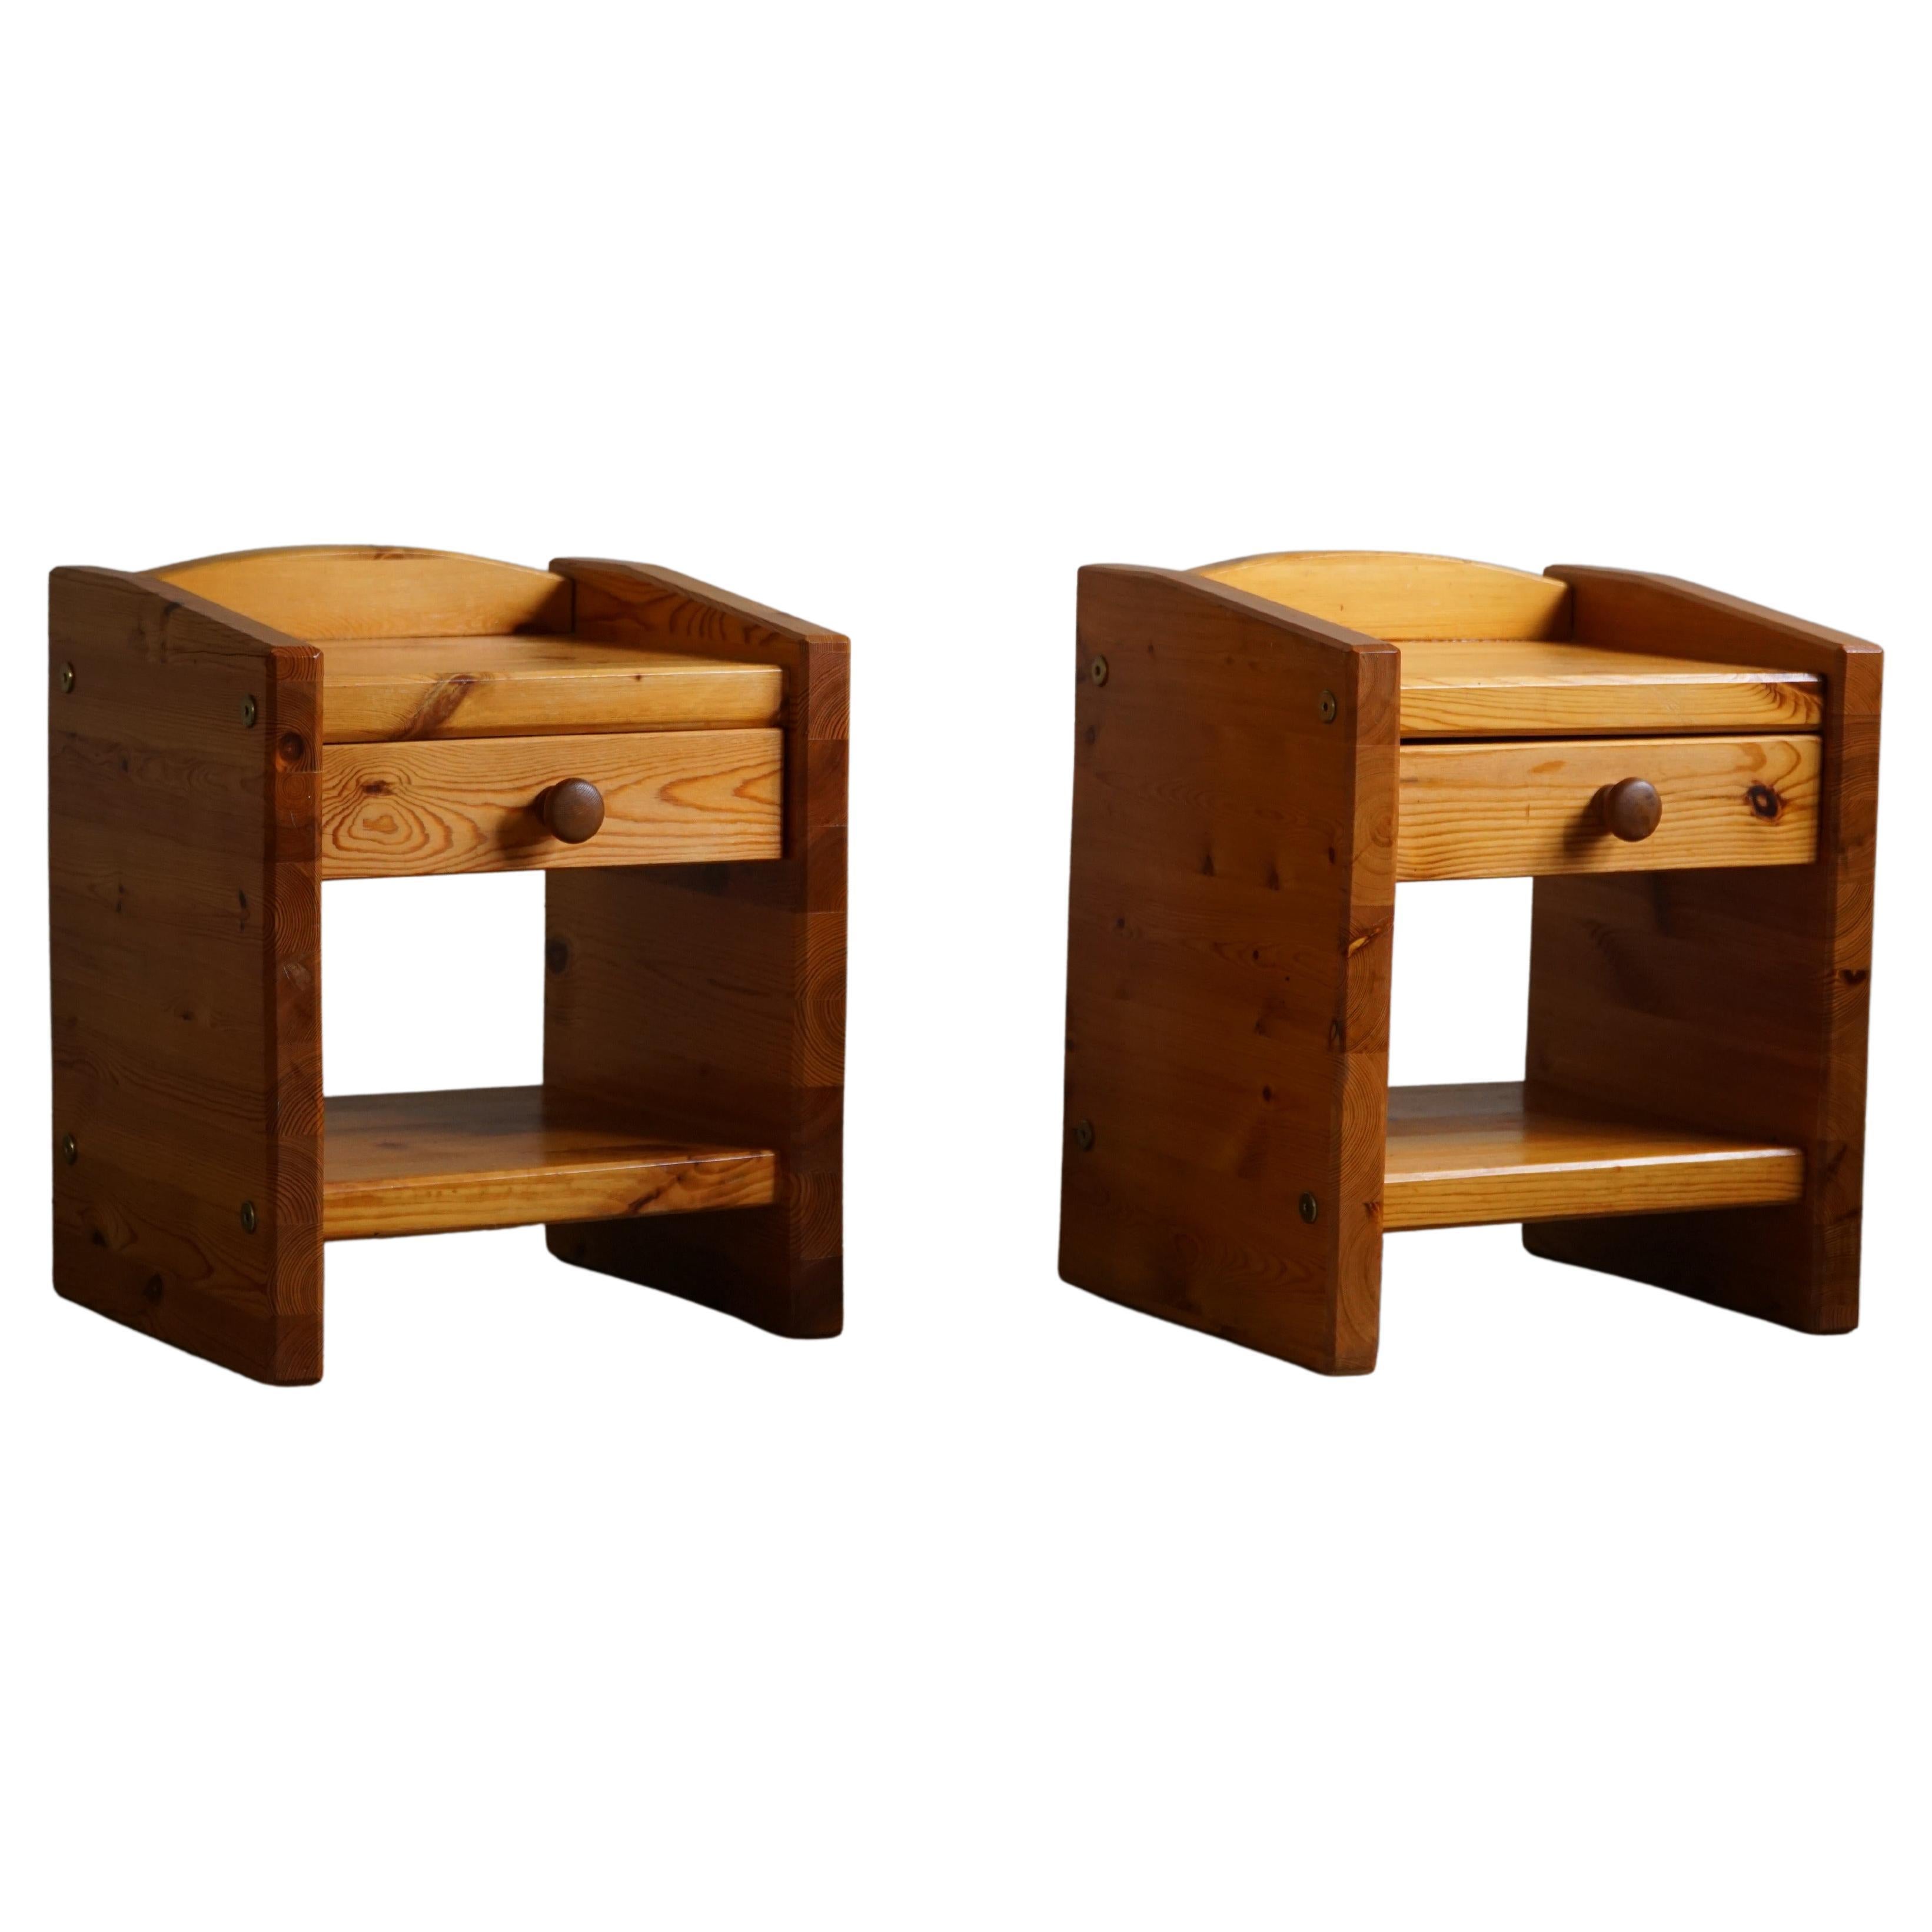 20th Midcentury, Pair of Brutalist Night Stands in Solid Pine, Denmark, 1970s